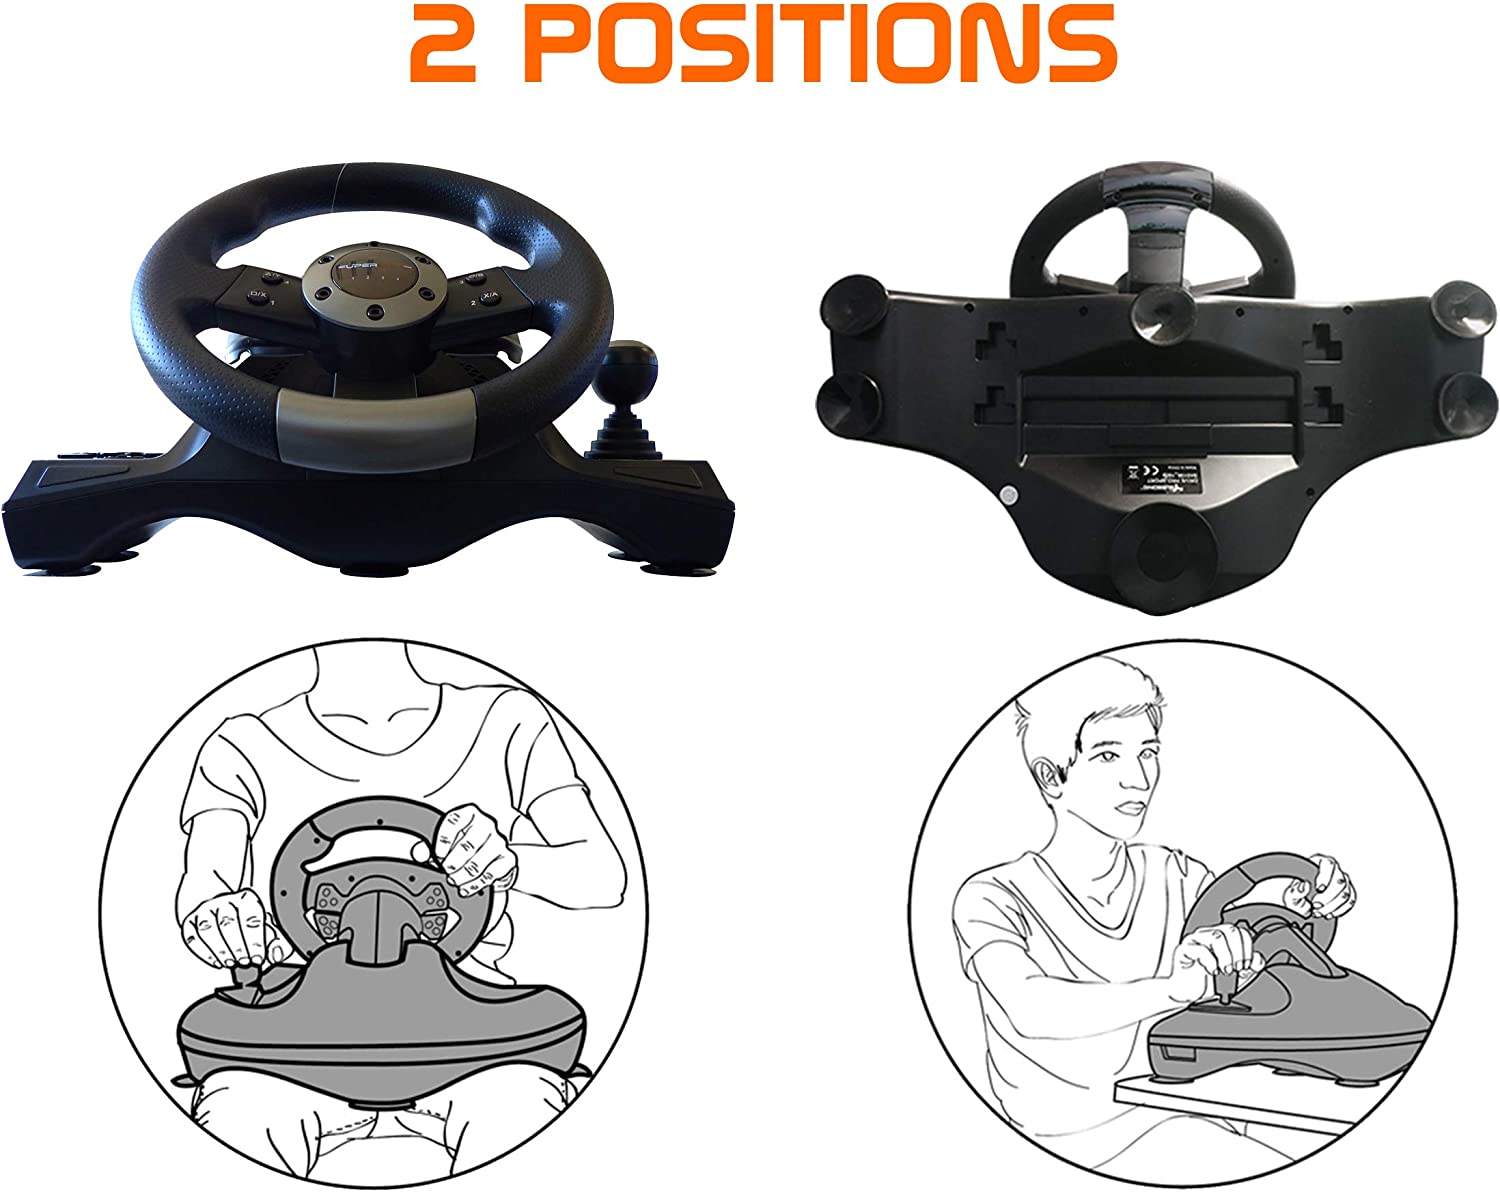 Subsonic SV700 Drive Pro Sport Racing Wheel & Pedals